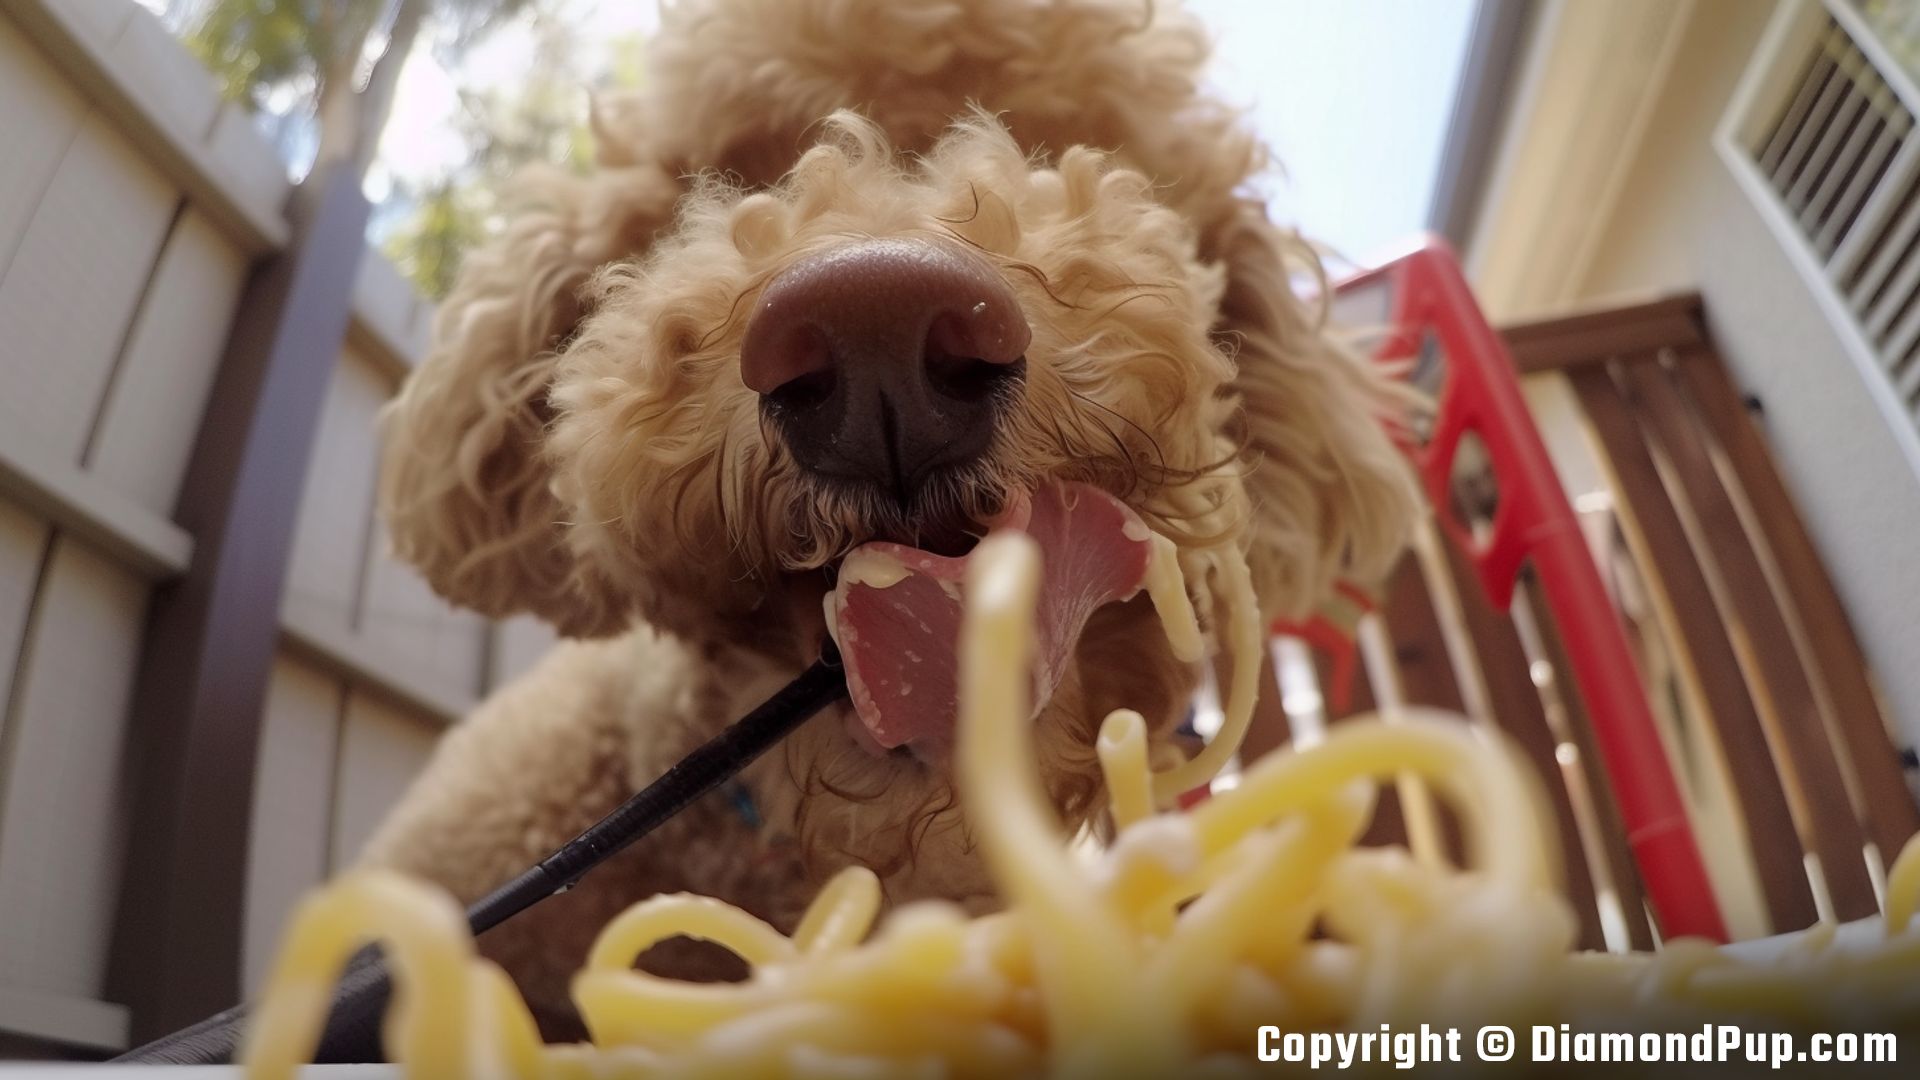 Photograph of a Cute Poodle Snacking on Pasta